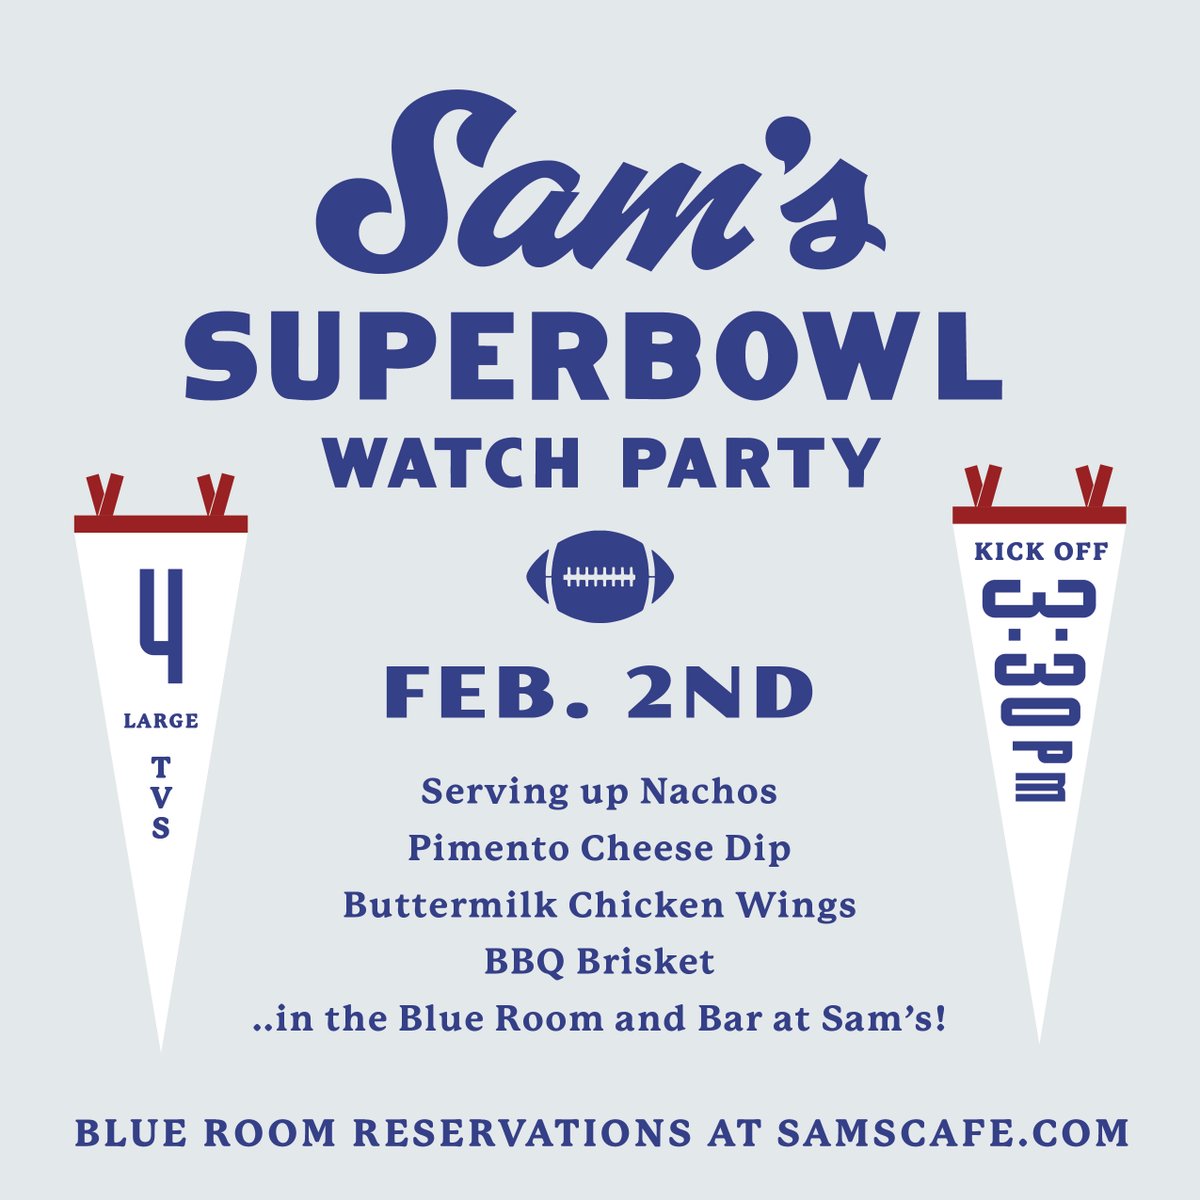 The countdown to Super Bowl LIV is ON! Join us February 2nd for our Super Bowl watch party where hopefully we'll be rooting on our @49ers! Reservations are not required but highly encouraged! You can secure your spot in the Blue Room at our website: samscafe.com